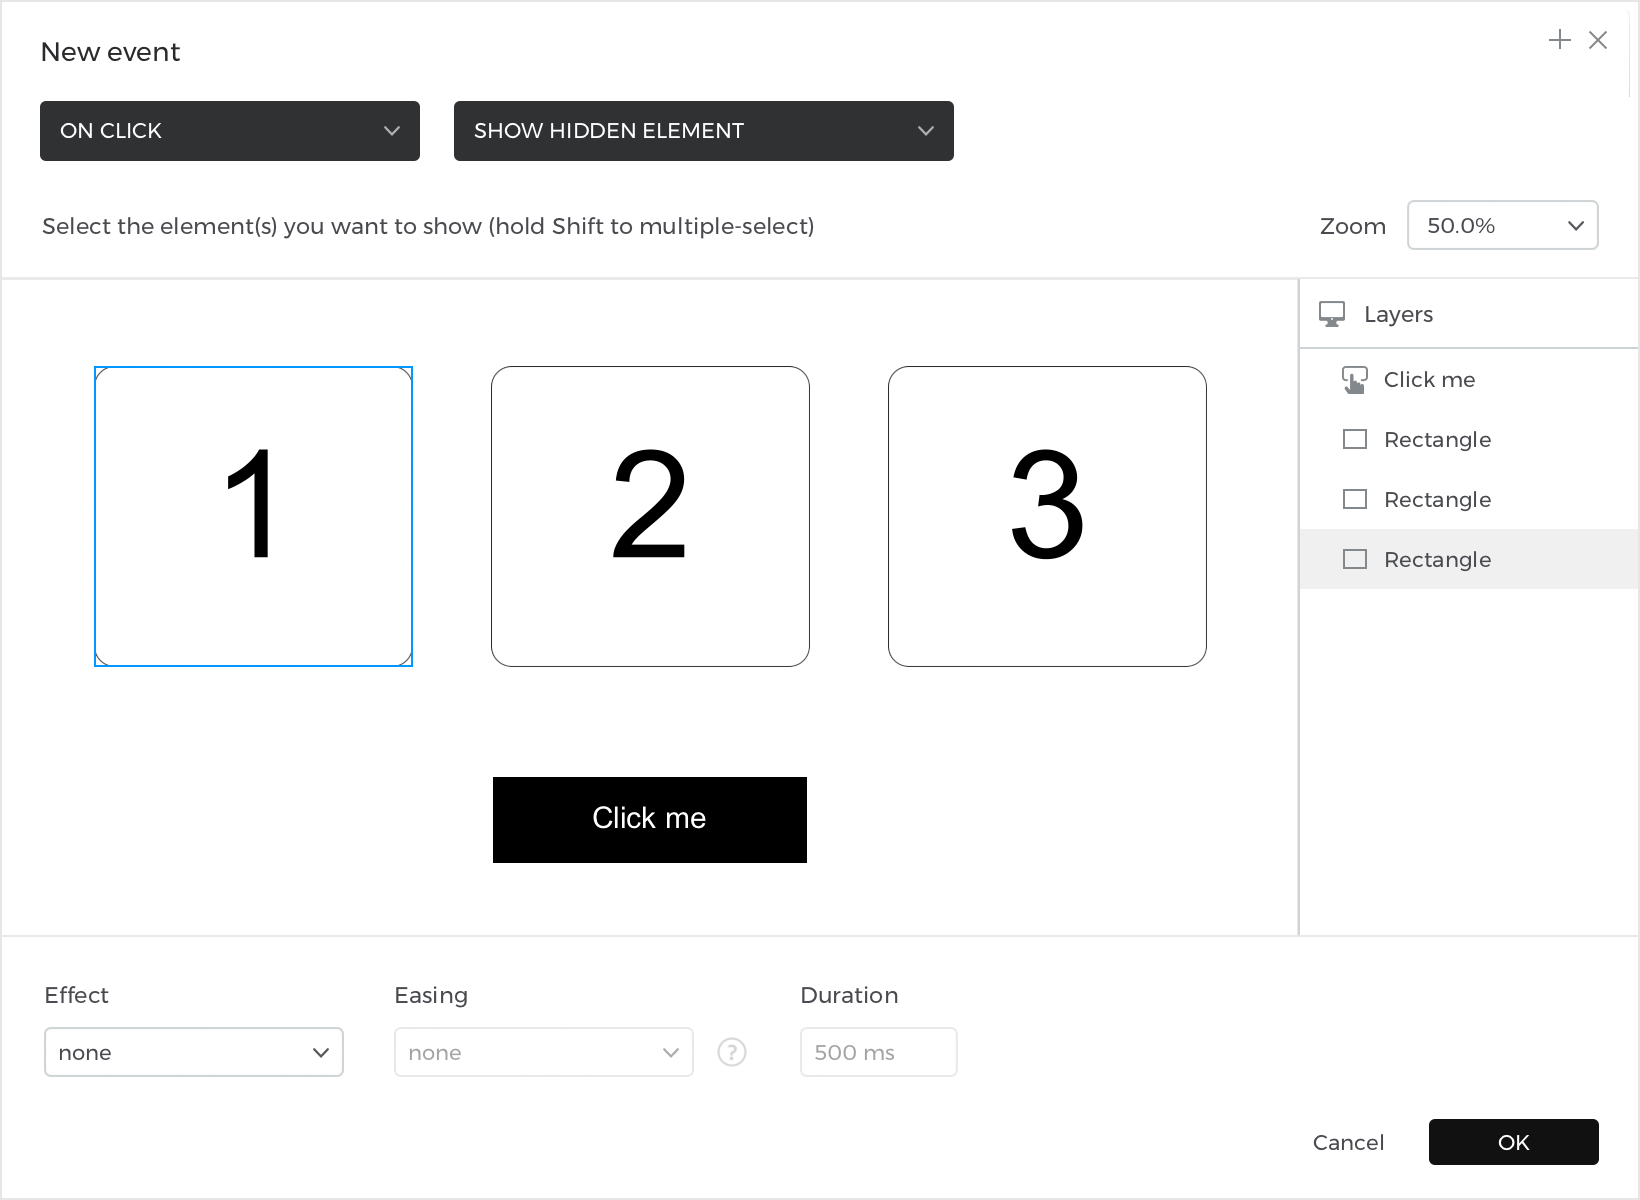 Create an On Click + Show event, showing the first rectangle with a fade effect